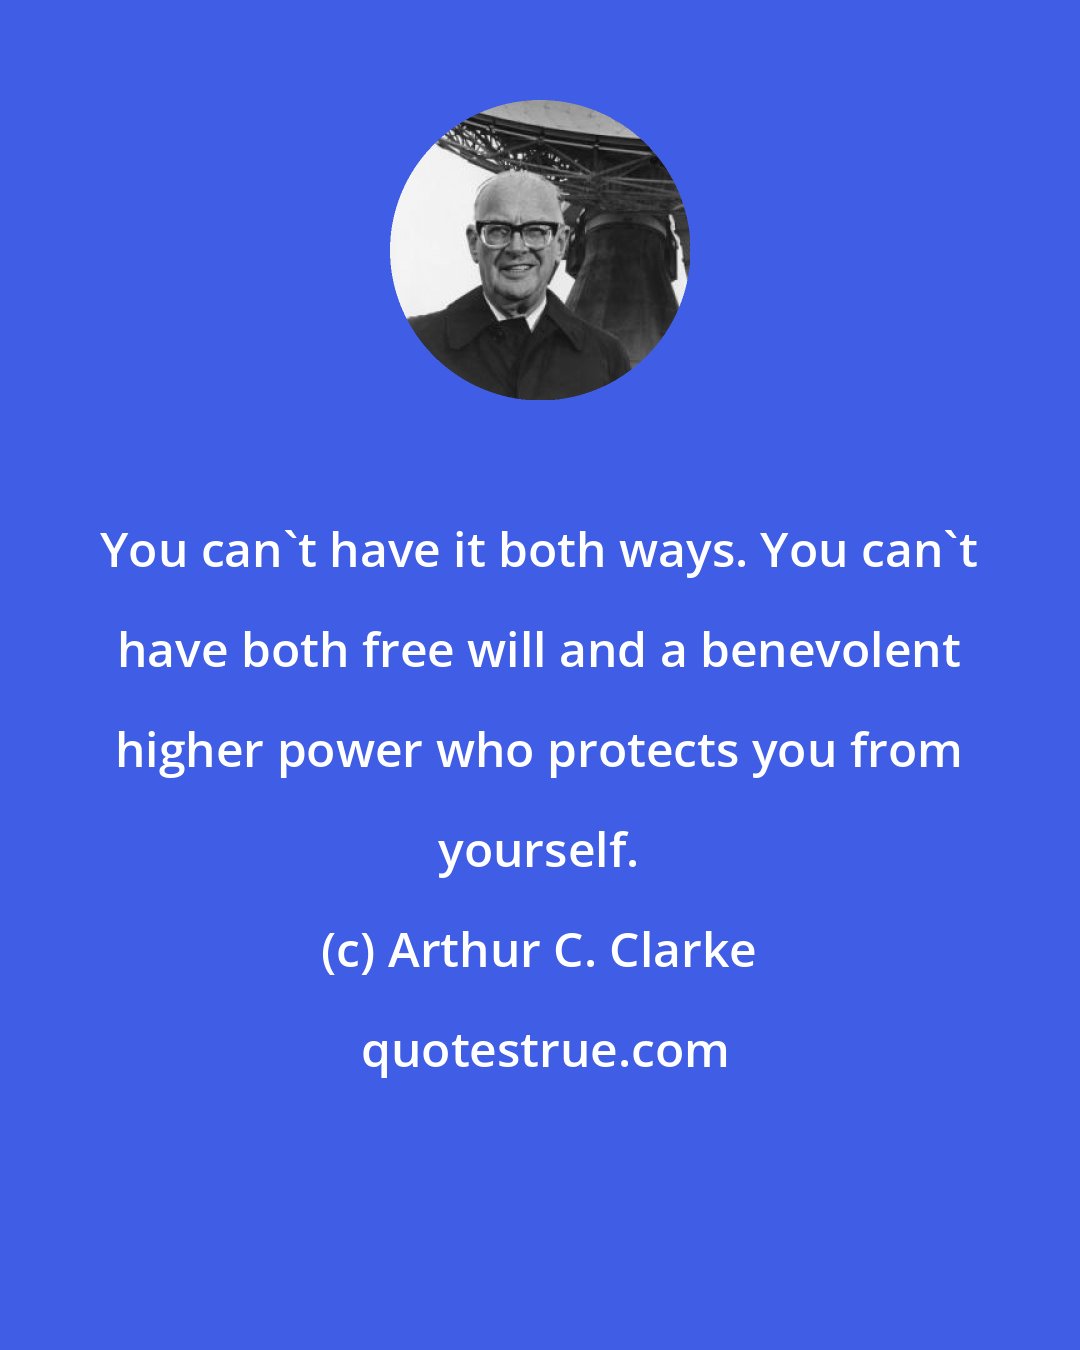 Arthur C. Clarke: You can't have it both ways. You can't have both free will and a benevolent higher power who protects you from yourself.